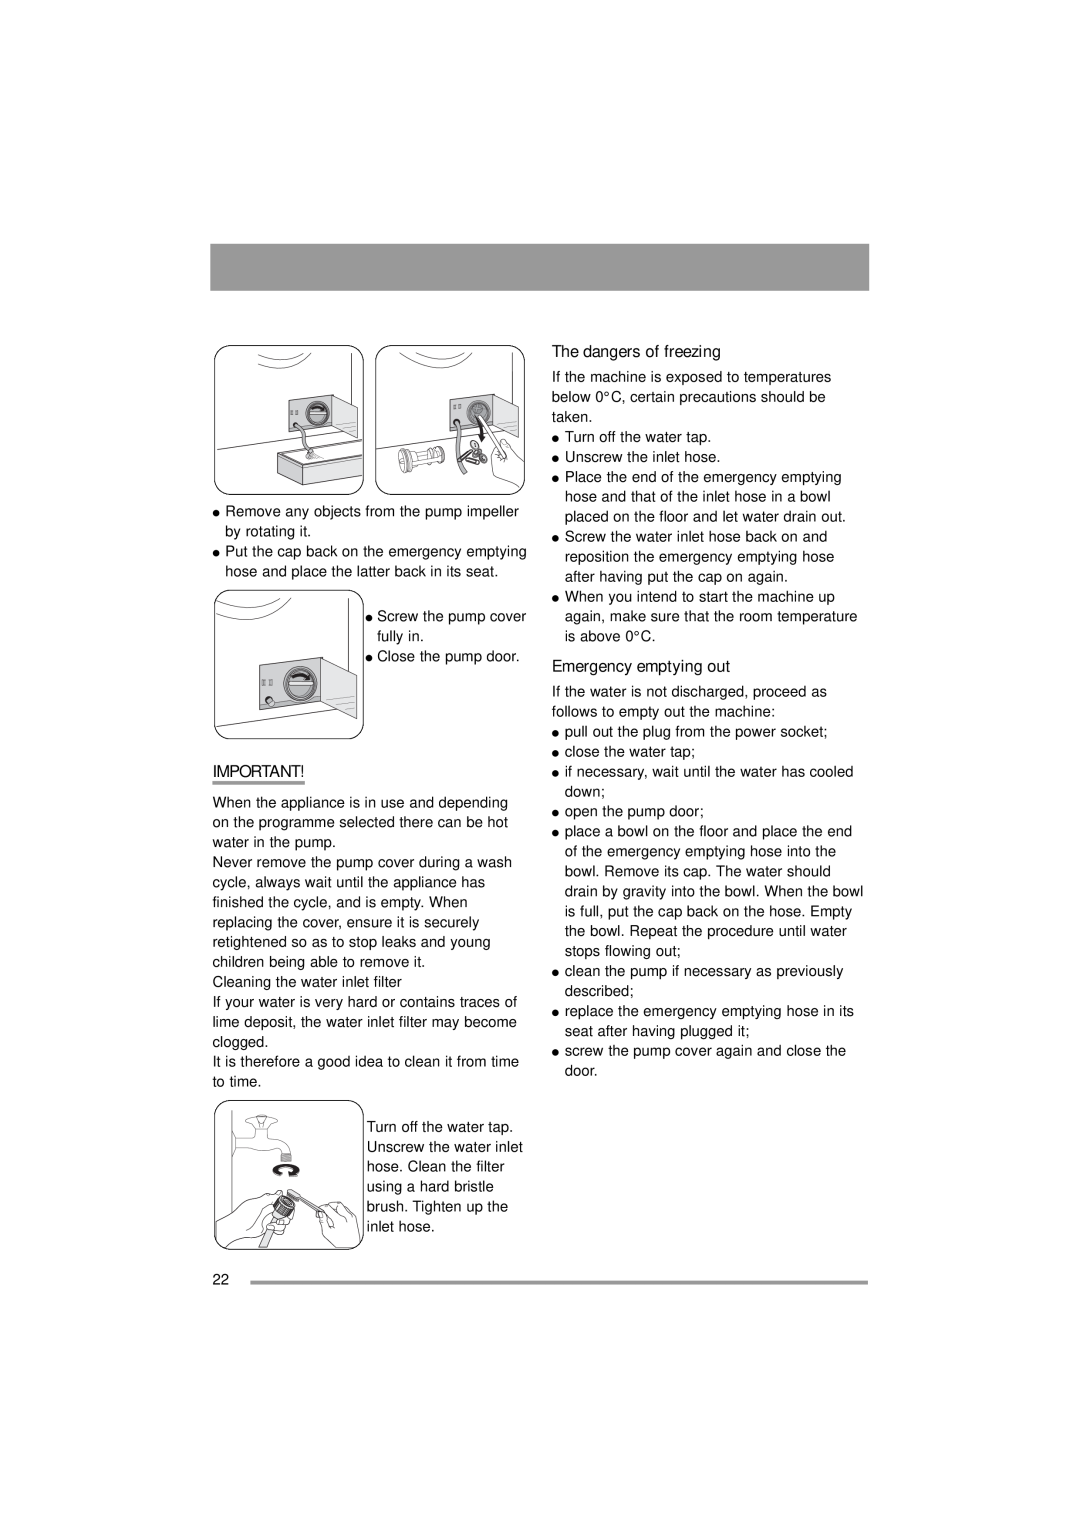 Zanussi ZWF 16581 user manual The dangers of freezing, Emergency emptying out 